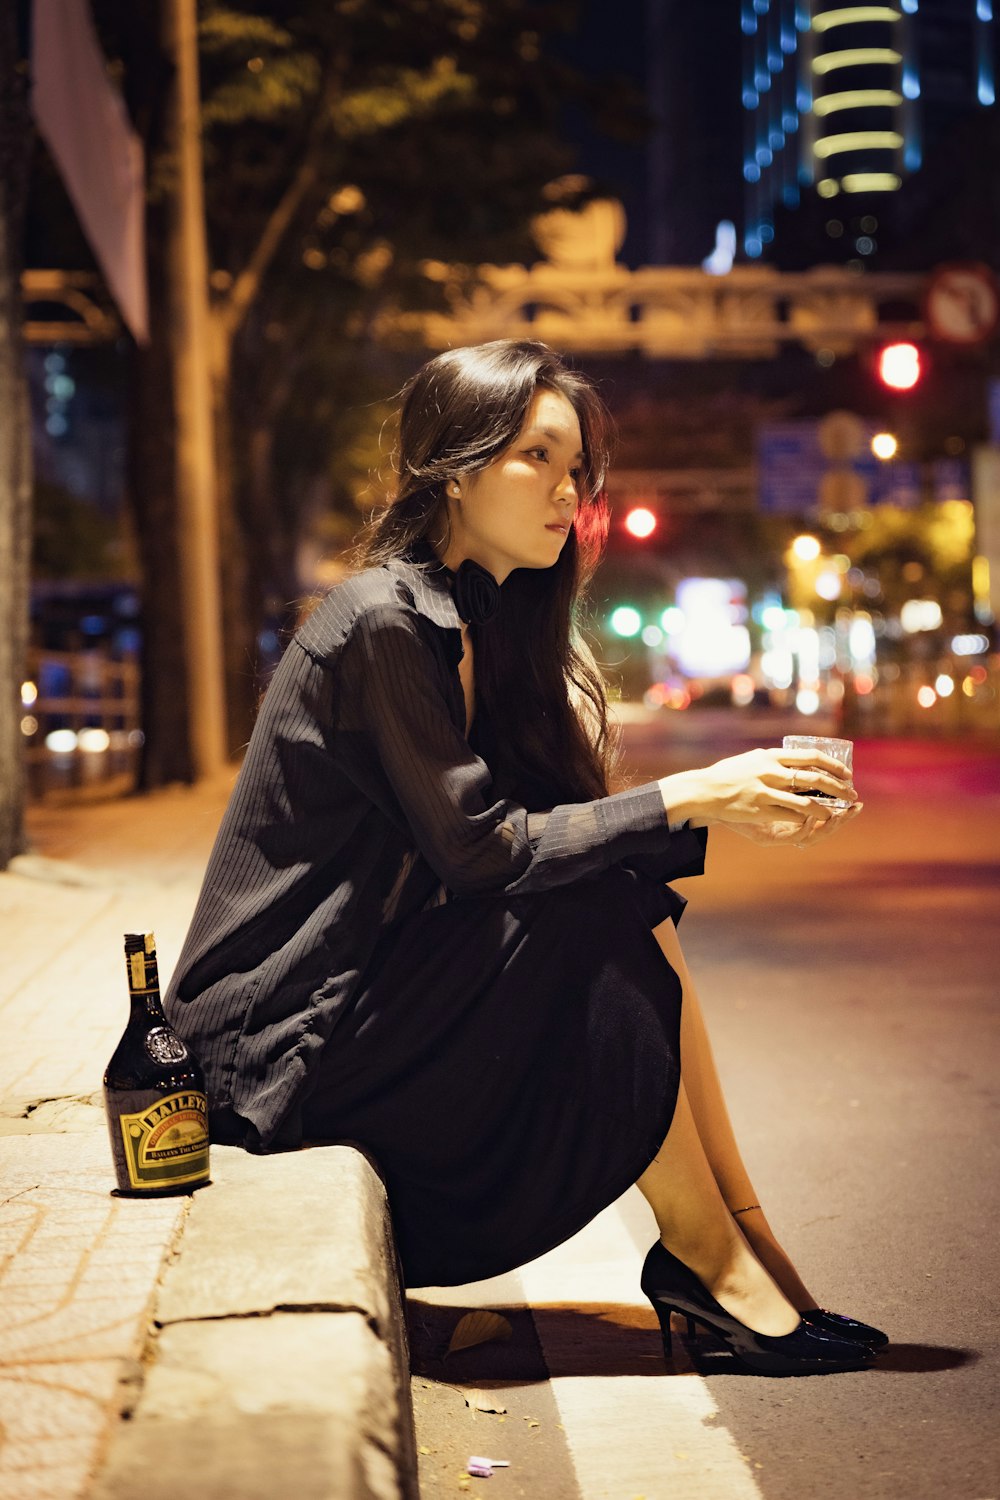 a woman sitting on a curb with a bottle of beer